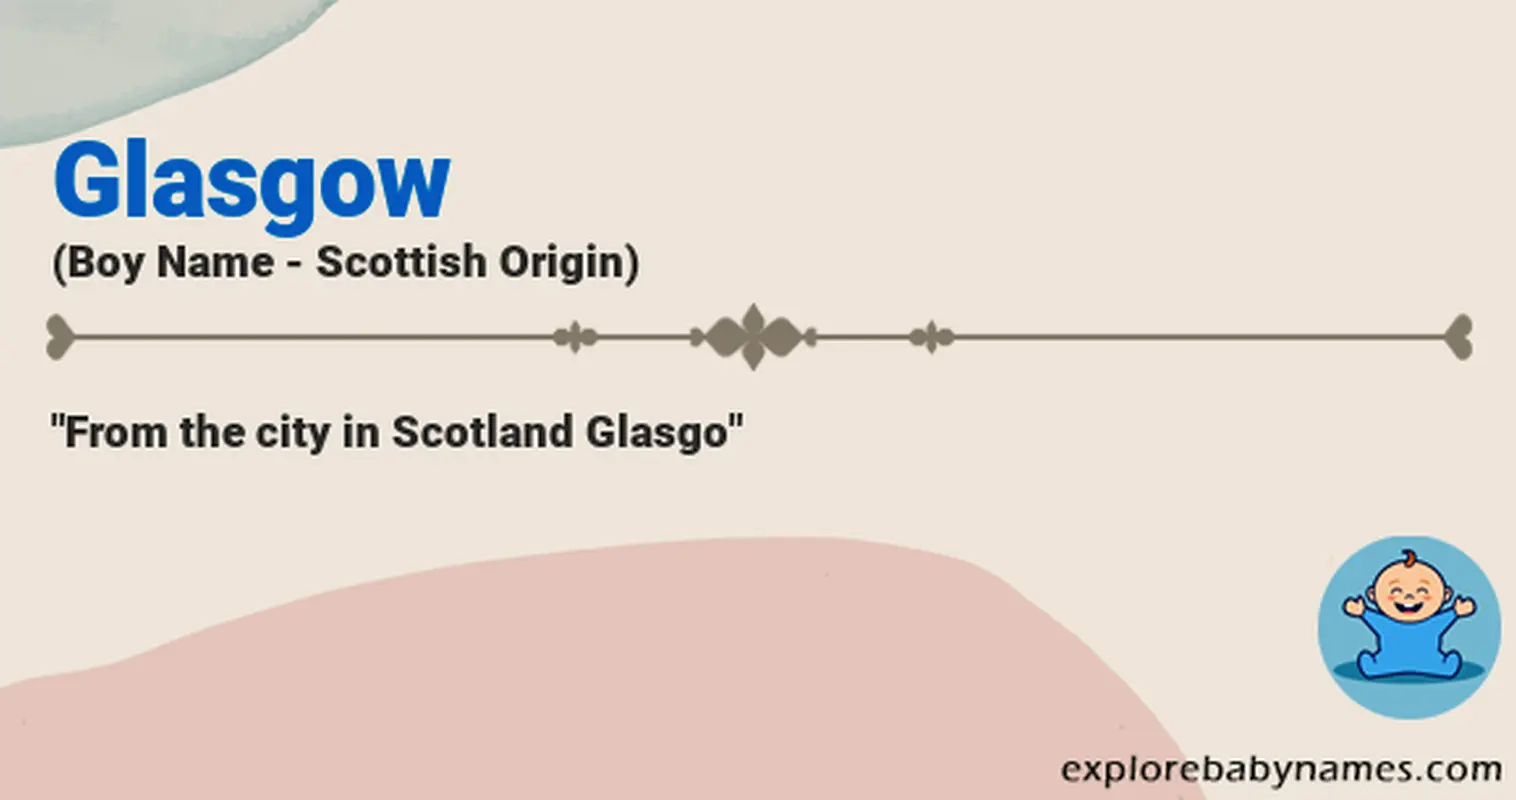 Meaning of Glasgow